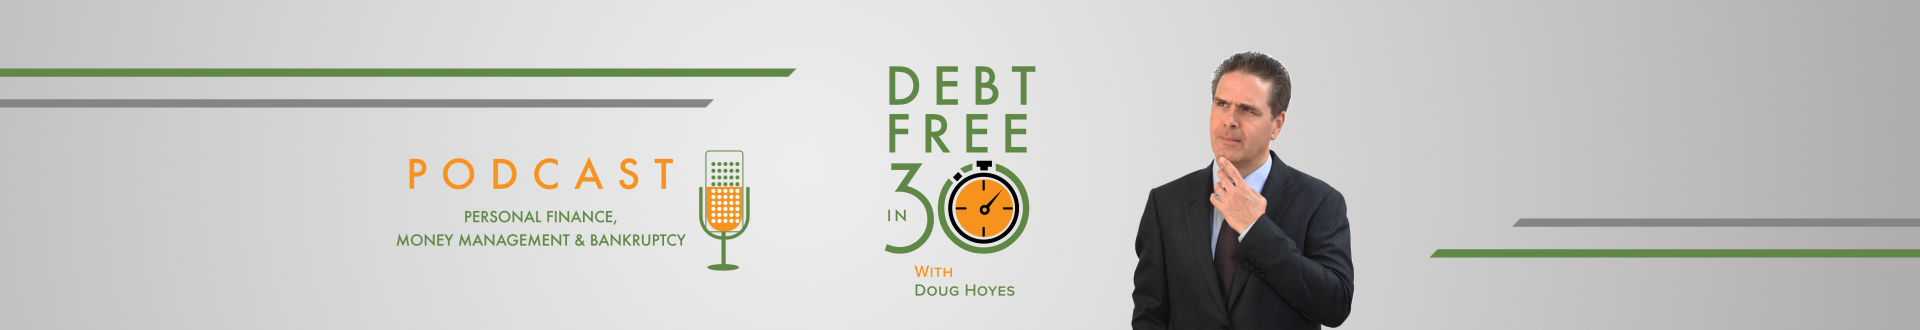 Debt Free in 30 Podcast Archive - Page 40